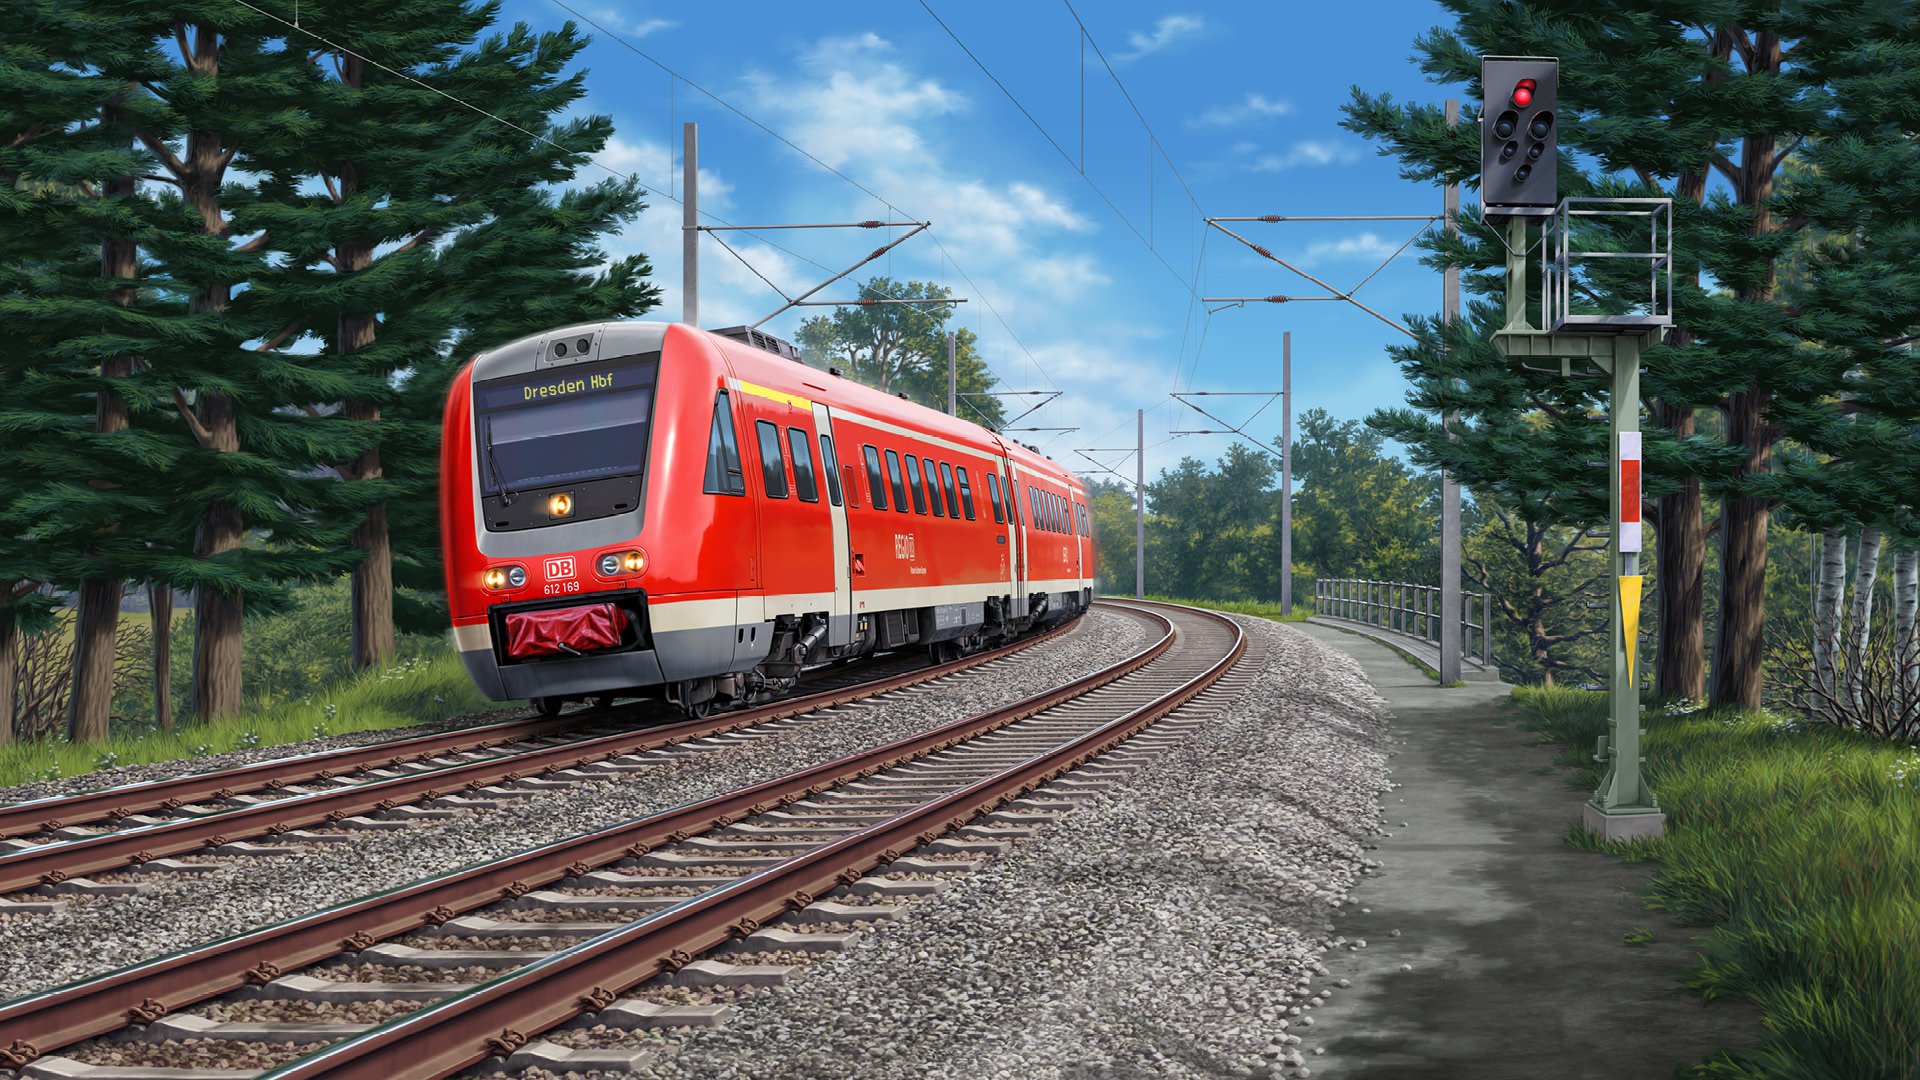 More information about "DTG: Tharandter Rampe: Dresden - Chemnitz Route Add-On"